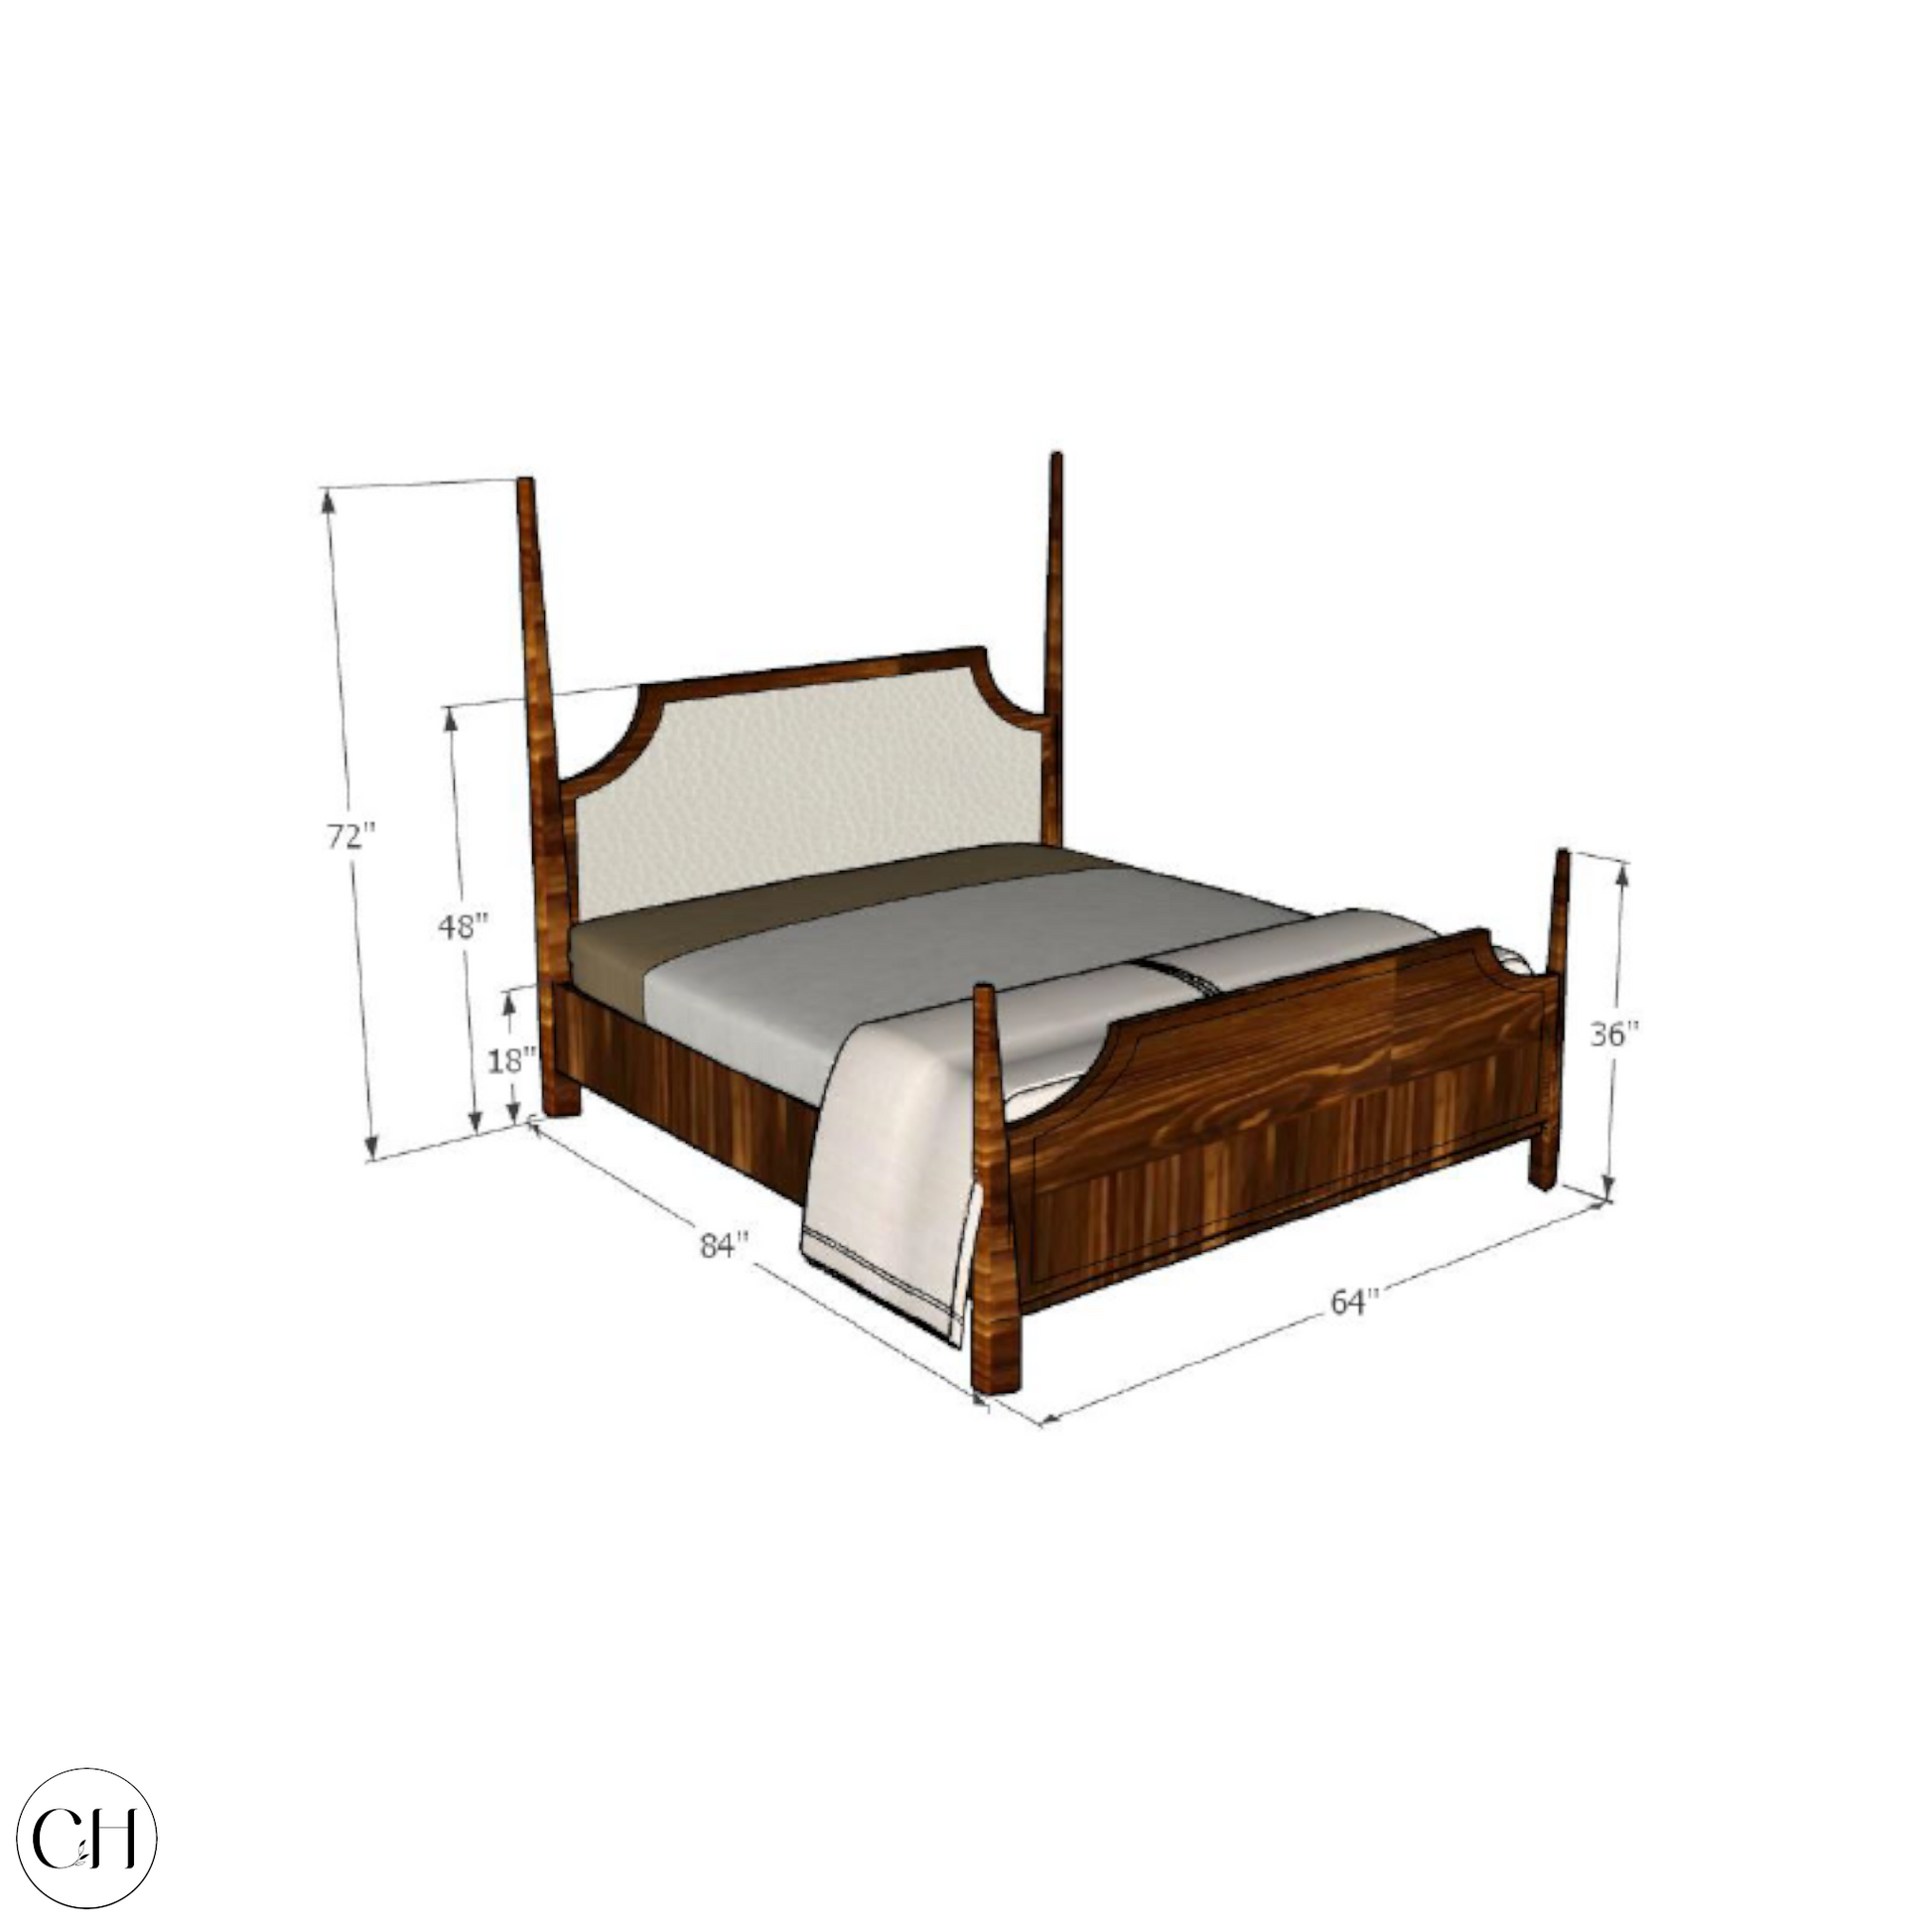 CustHum - 4-poster bed with upholstered headboard (dimensions, queen-size)